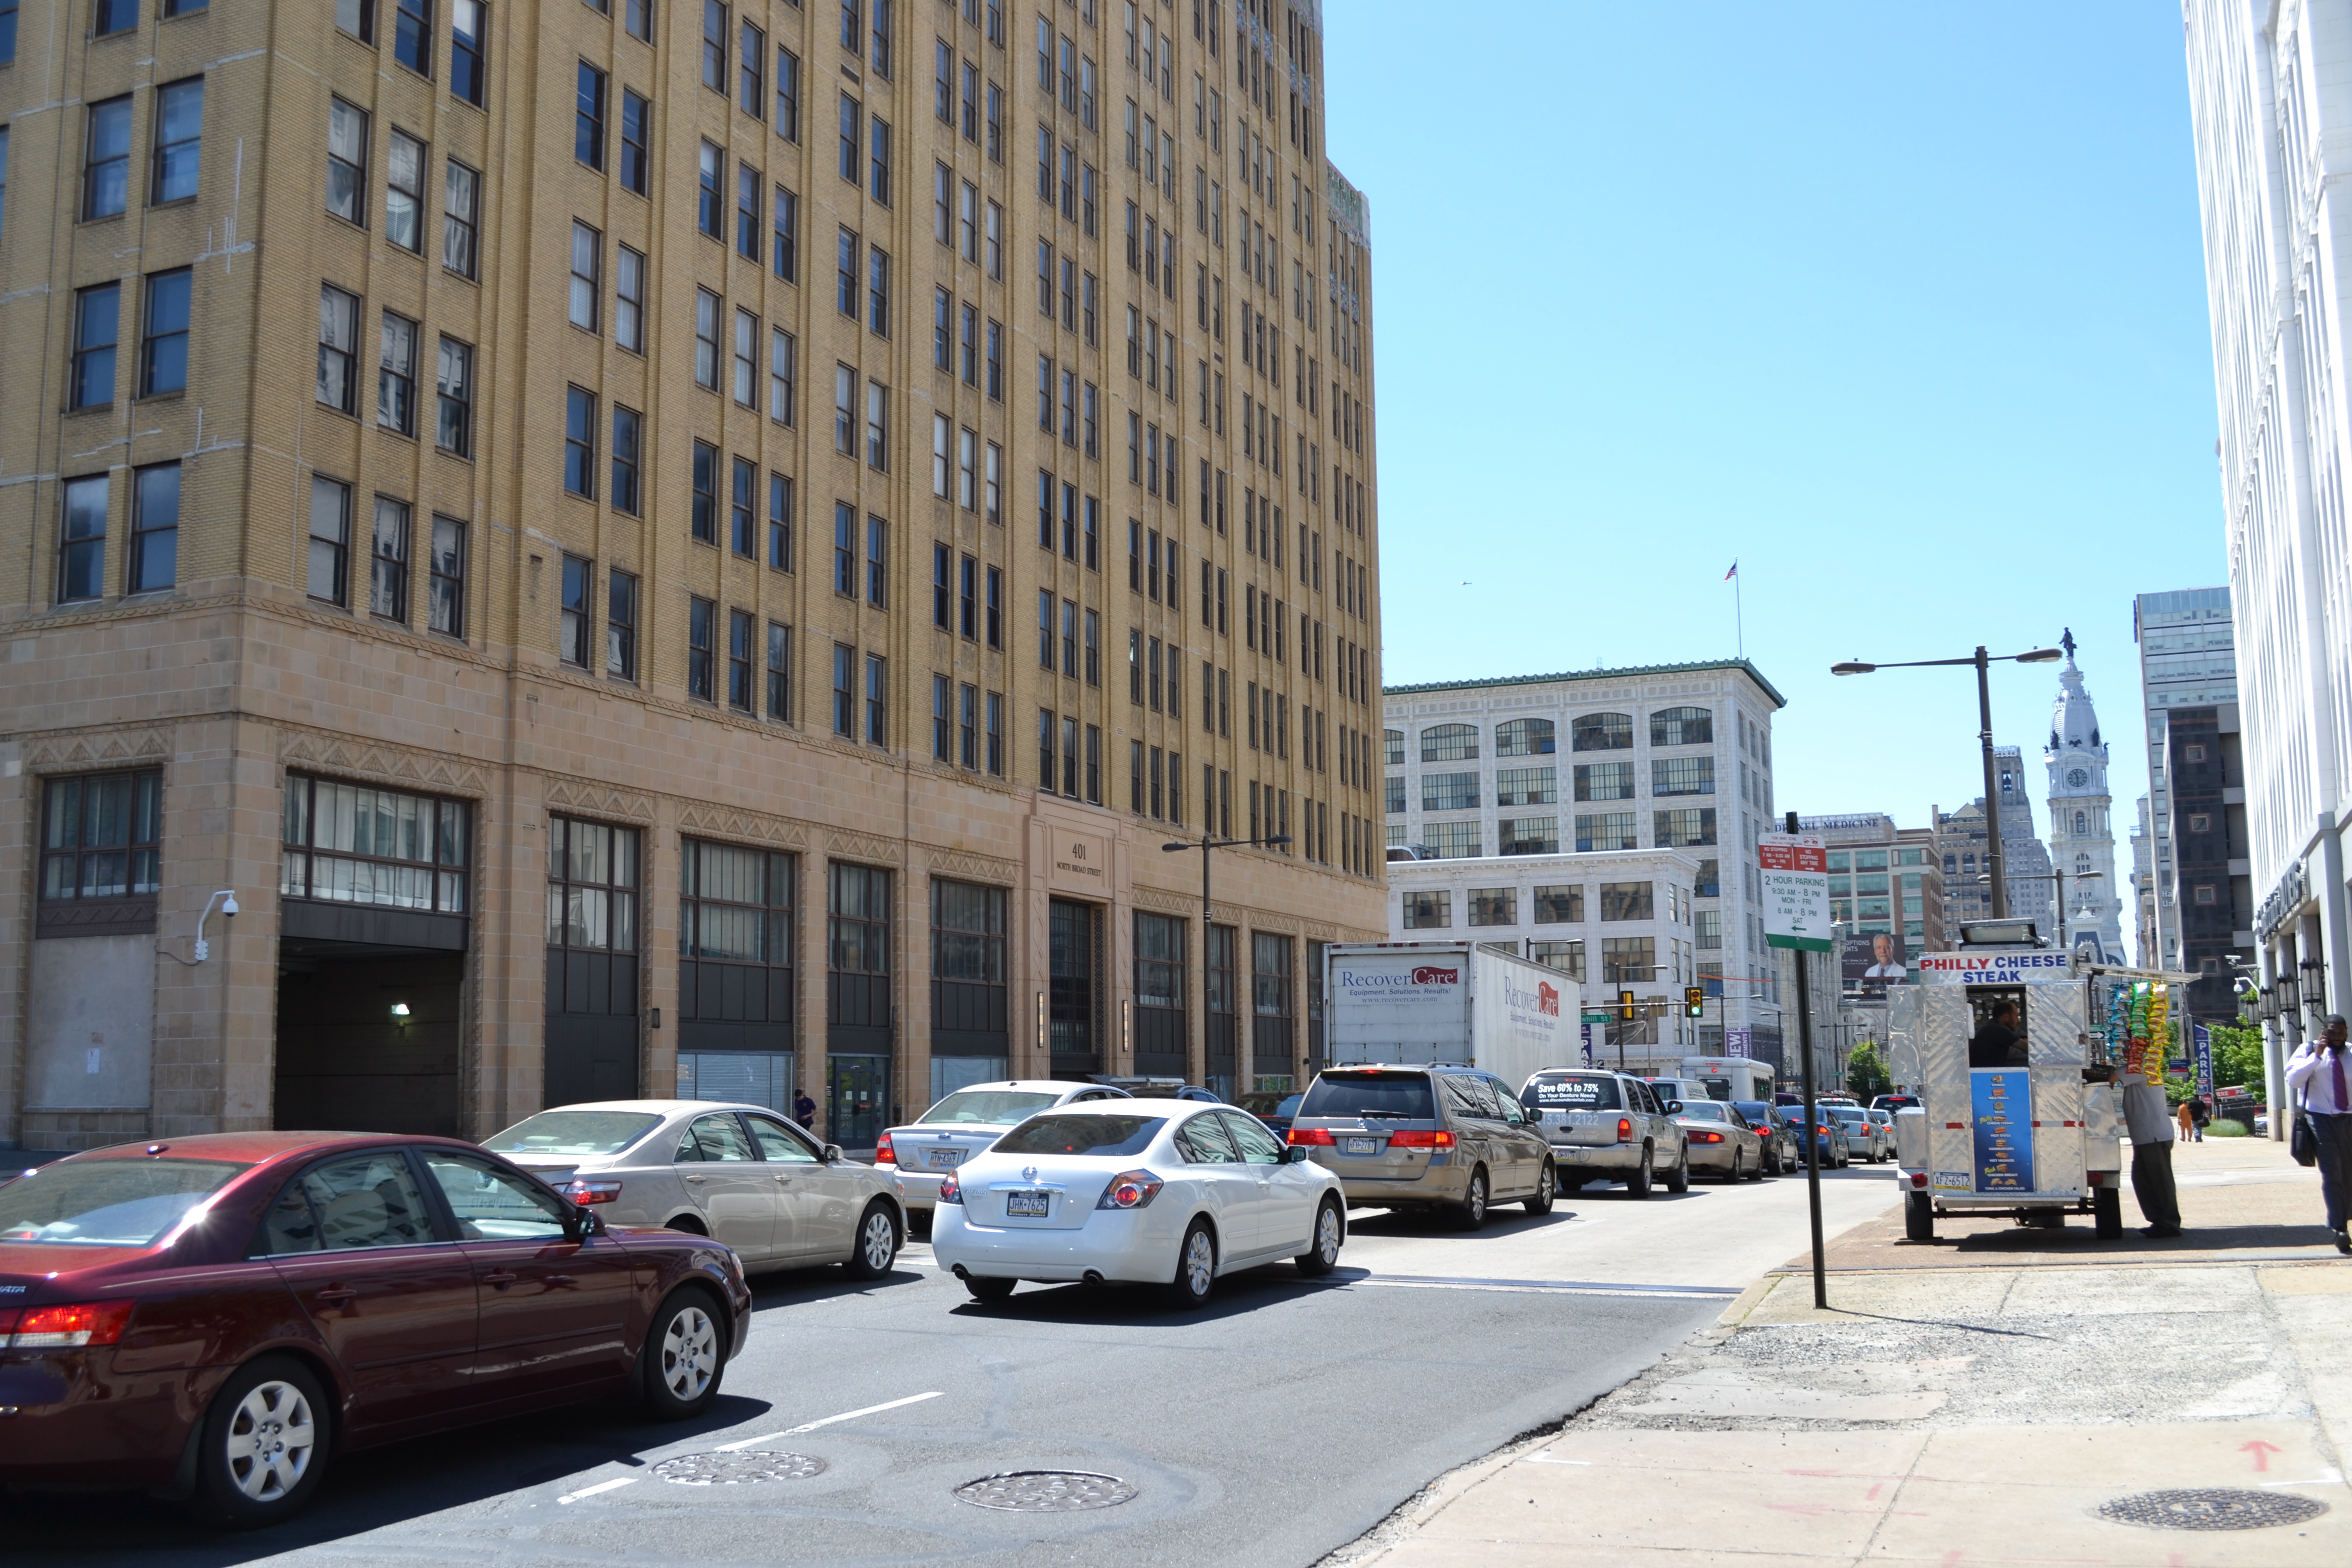 PennDOT will replace the bridge that supports Broad Street from Callowhill to Noble streets